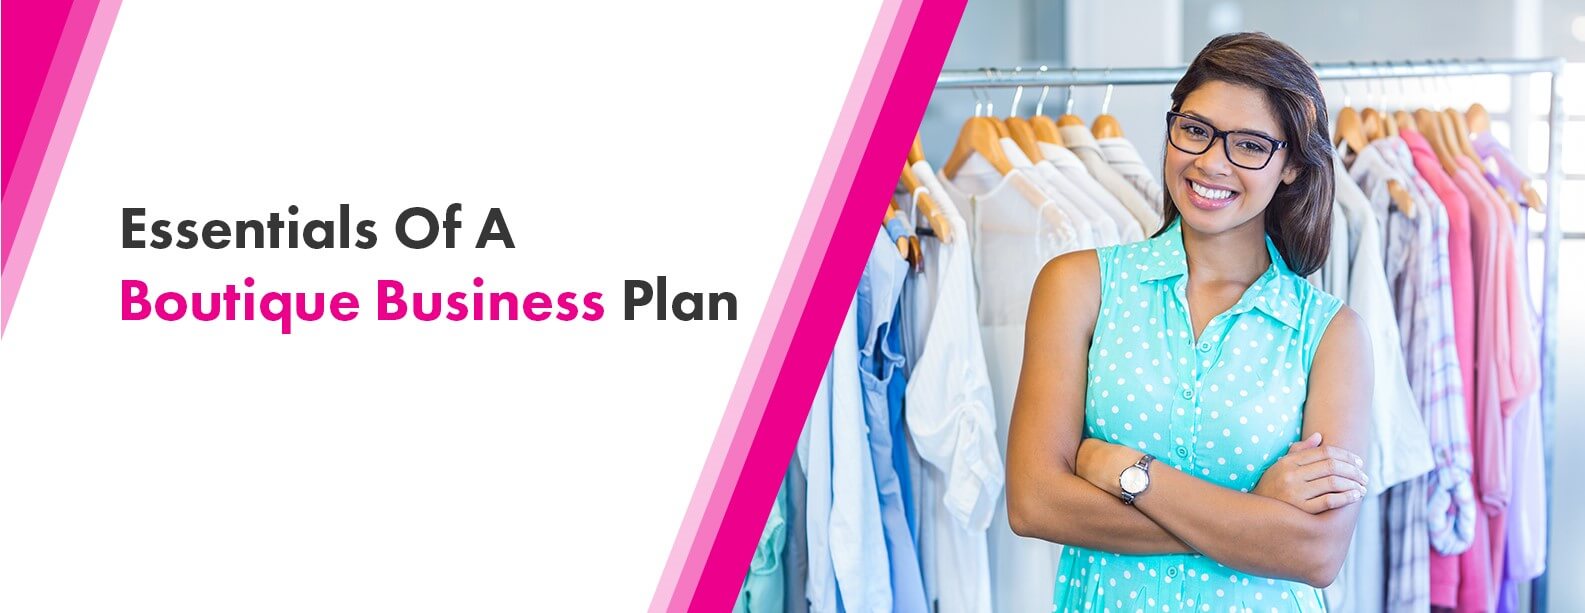 boutique business plan in india